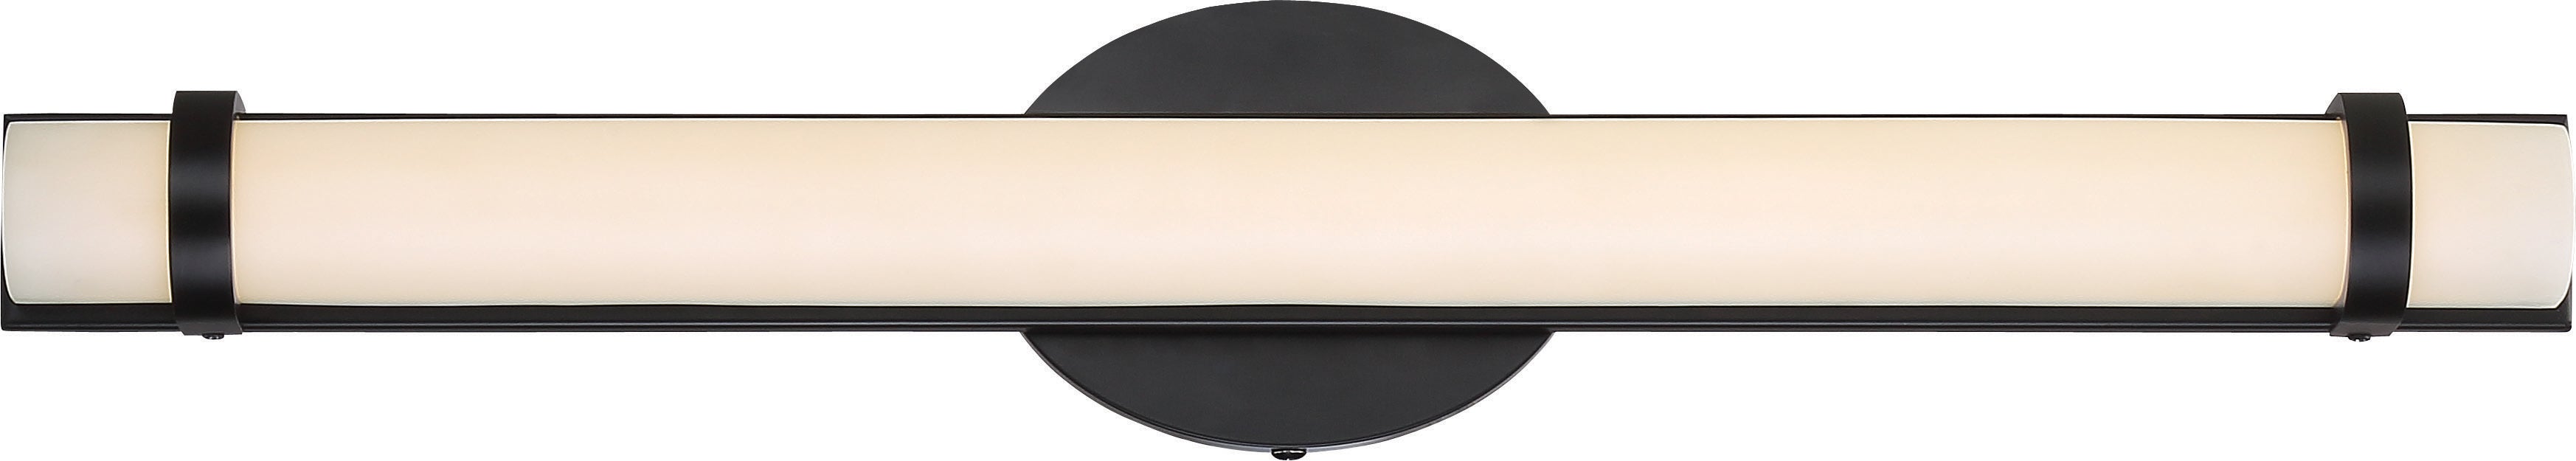 SATCO/NUVO Slice Double LED Wall Sconce Aged Bronze Finish (62-934)